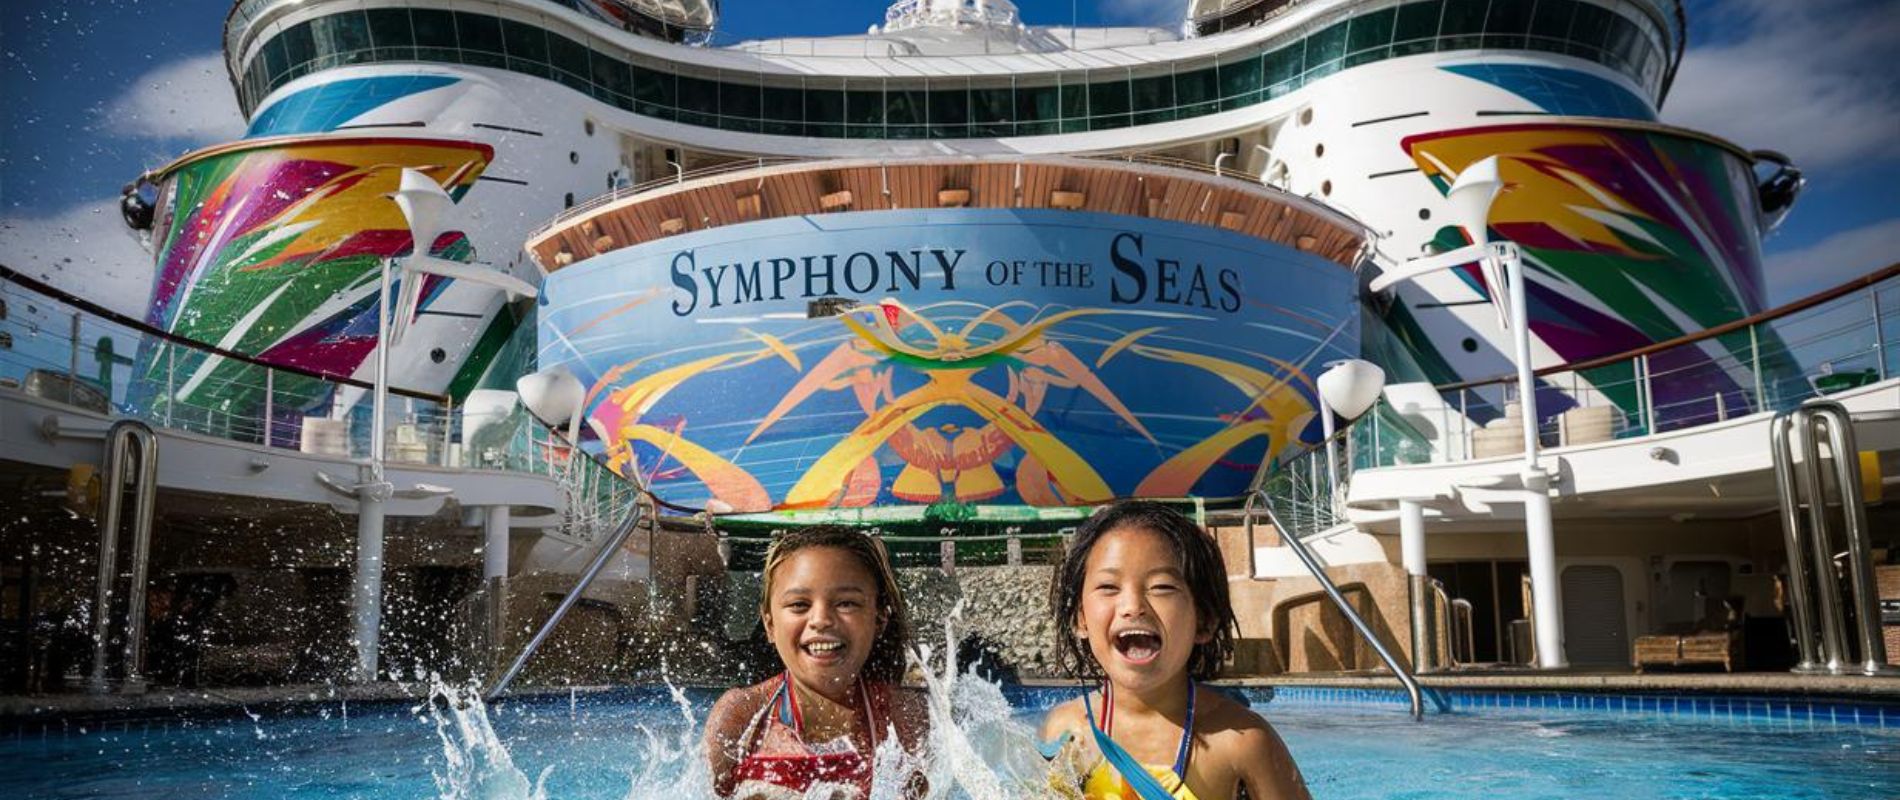 Two girls in the swimming pool on Symphony of the Seas cruise ship